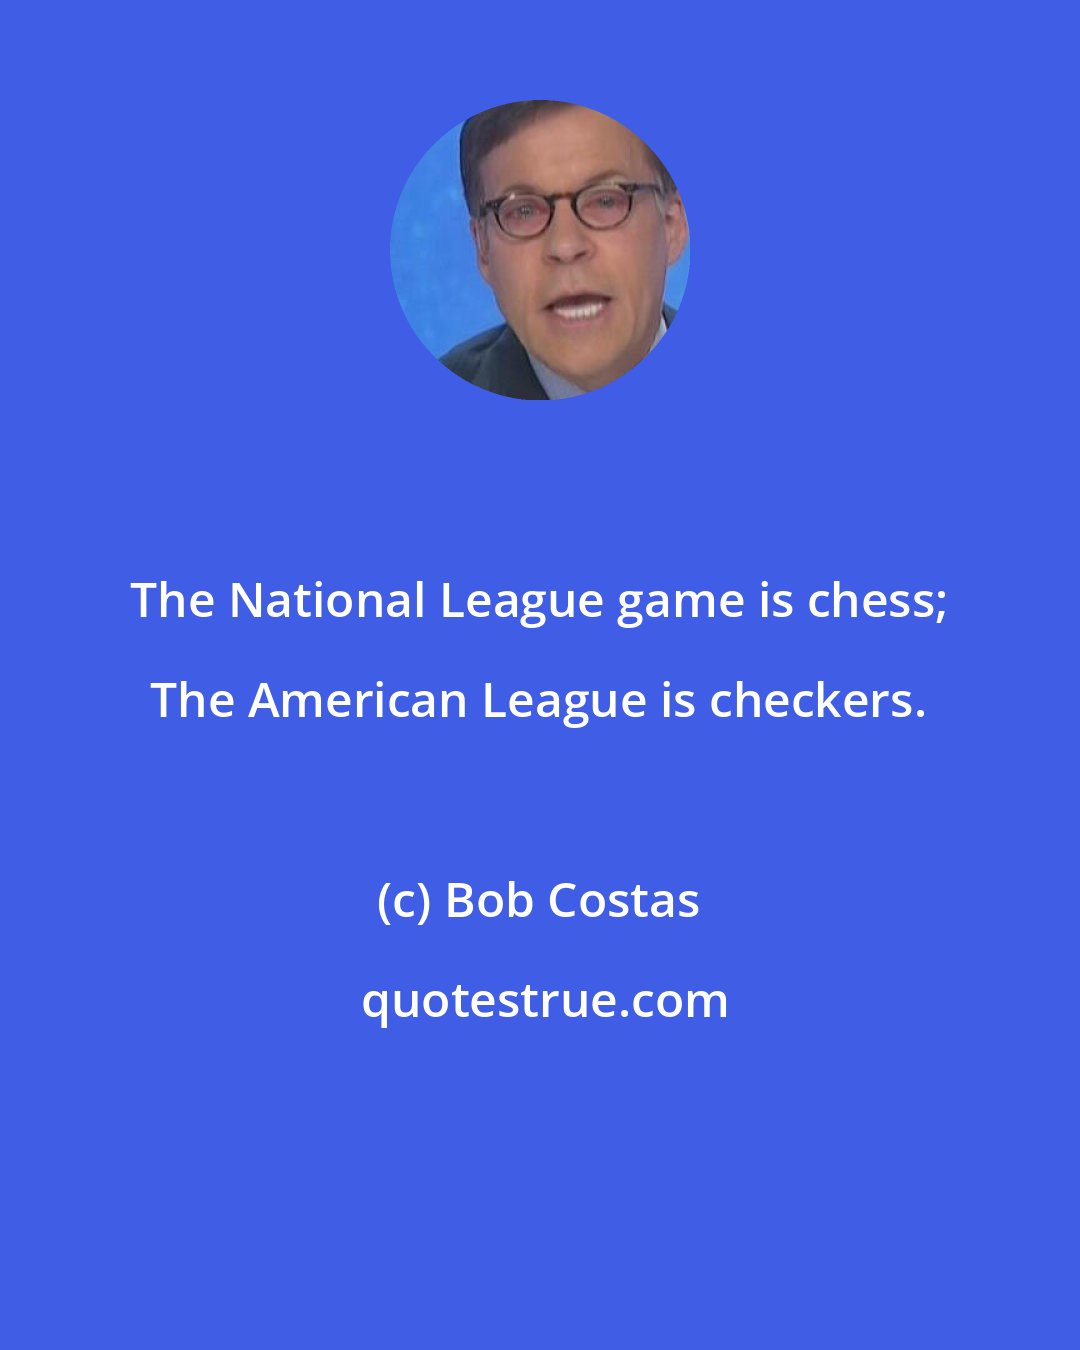 Bob Costas: The National League game is chess; The American League is checkers.